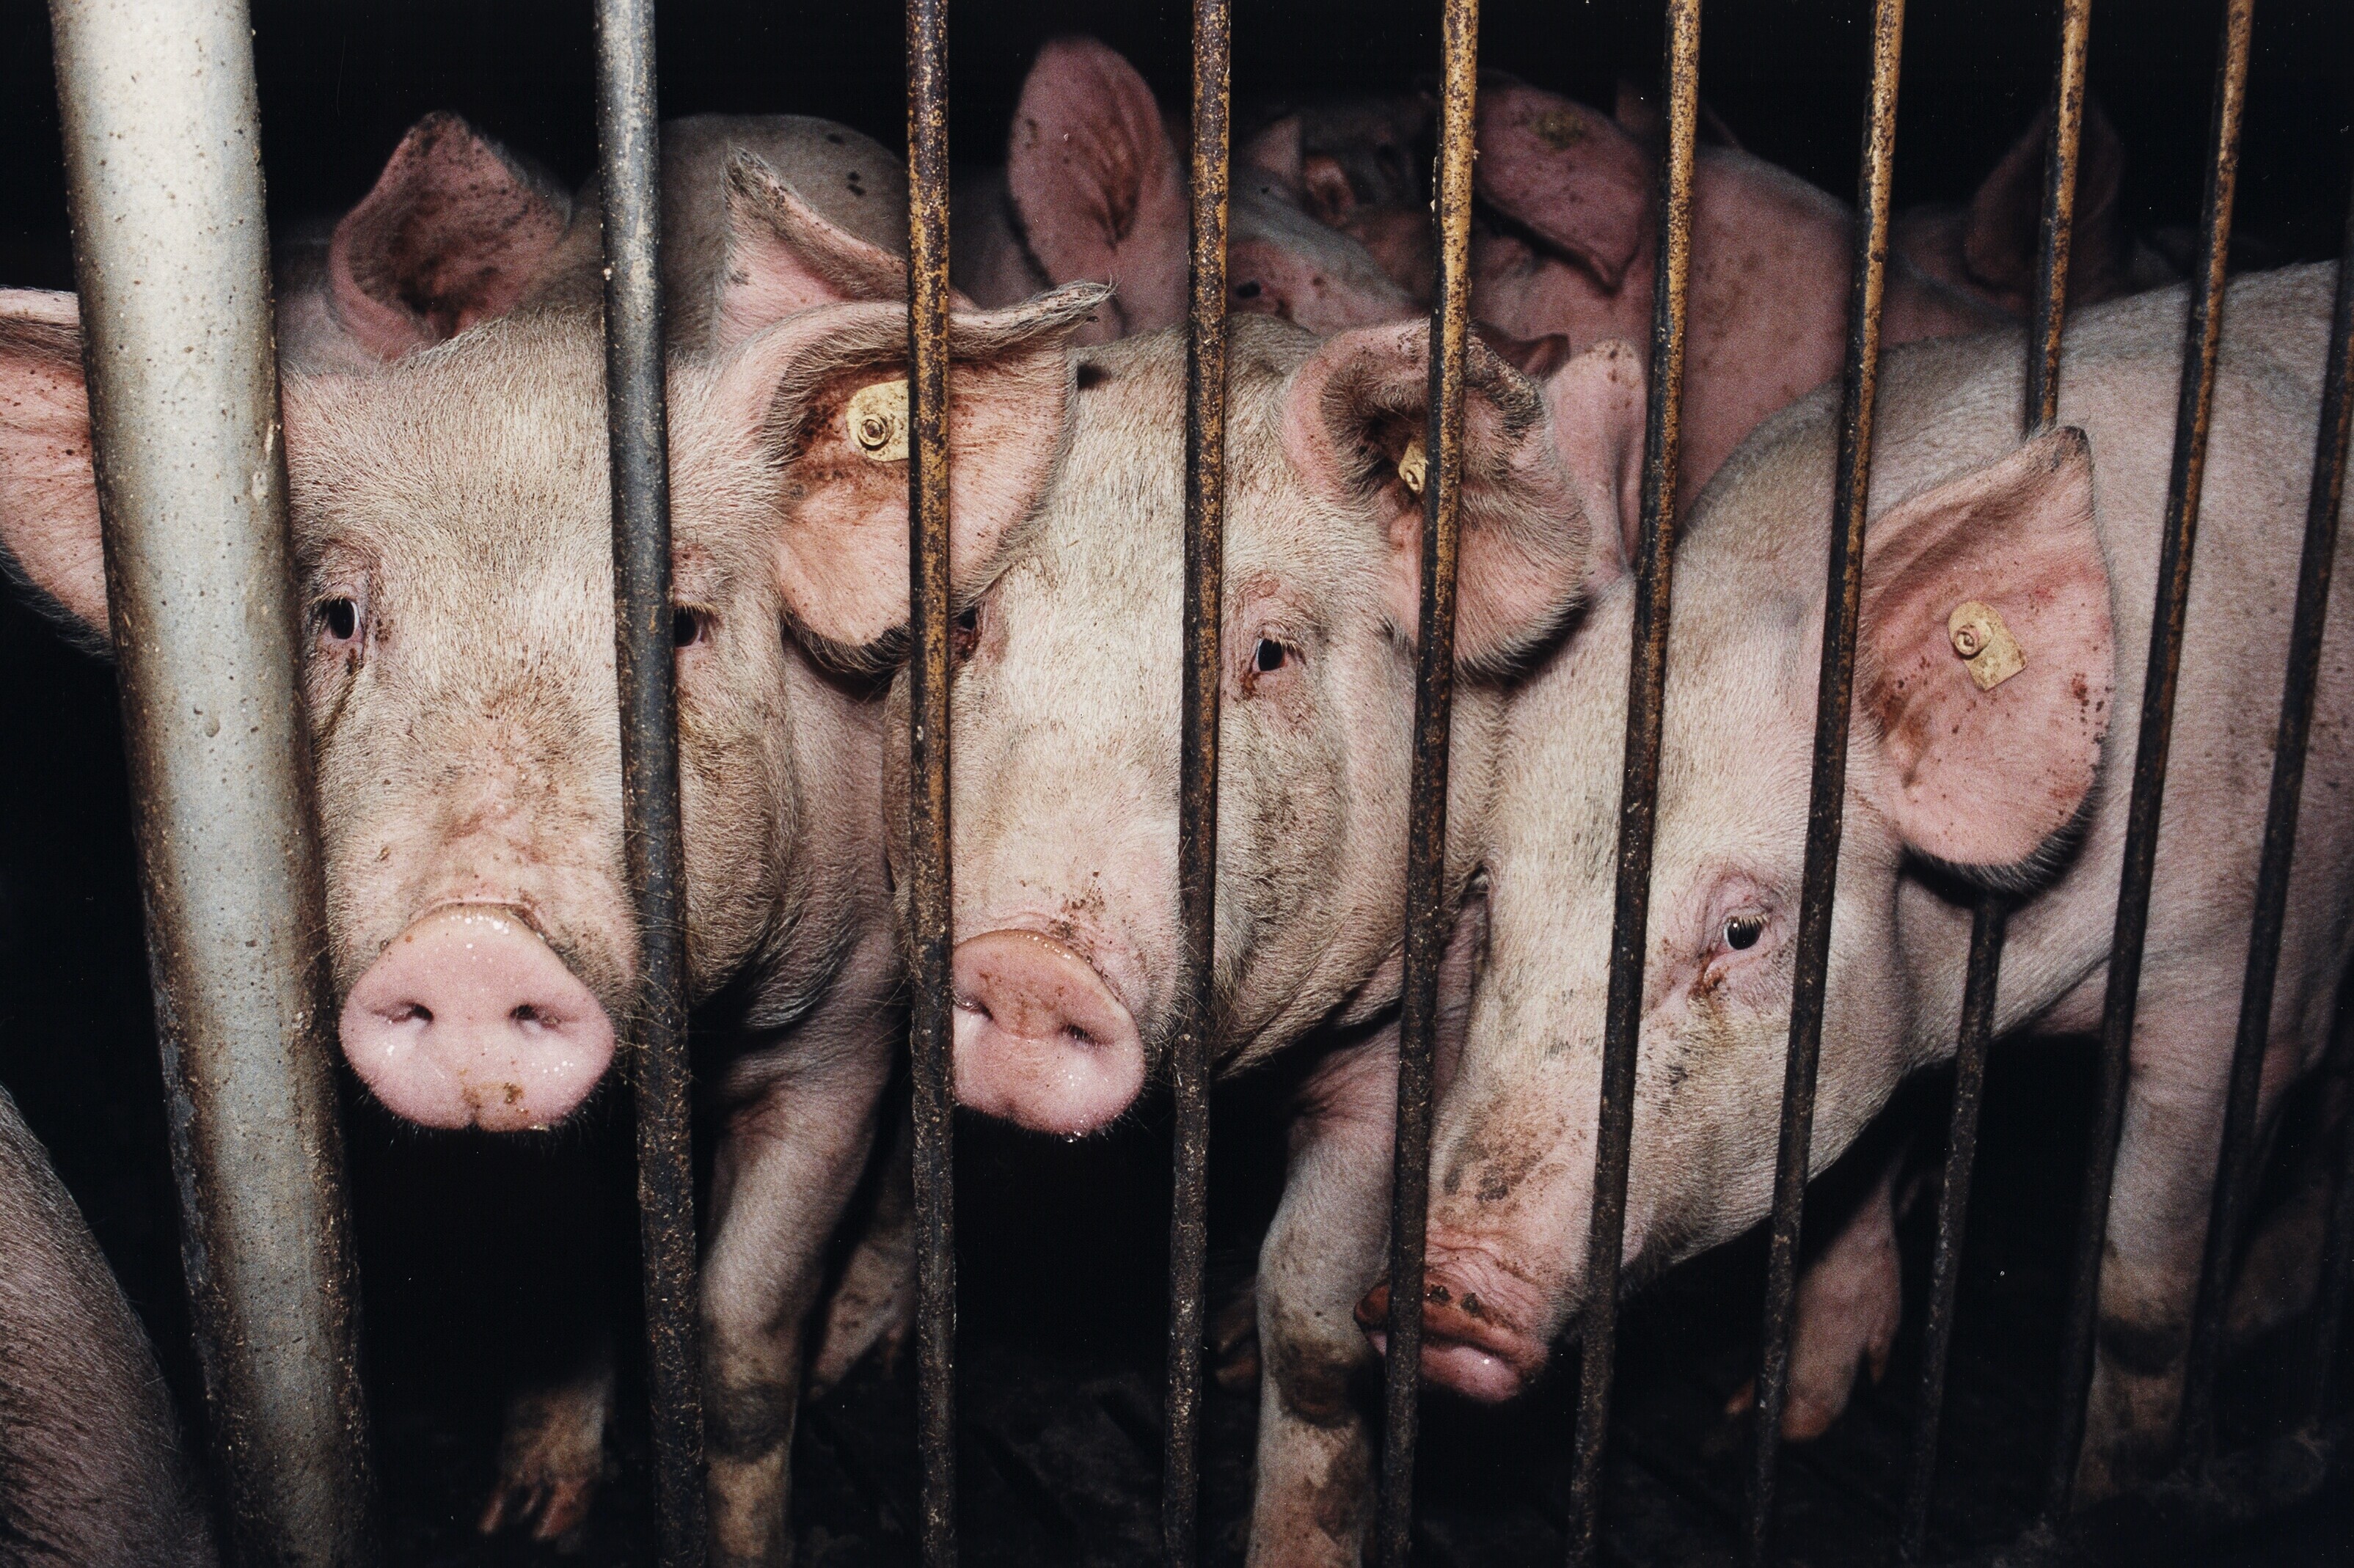 Pigs in cages